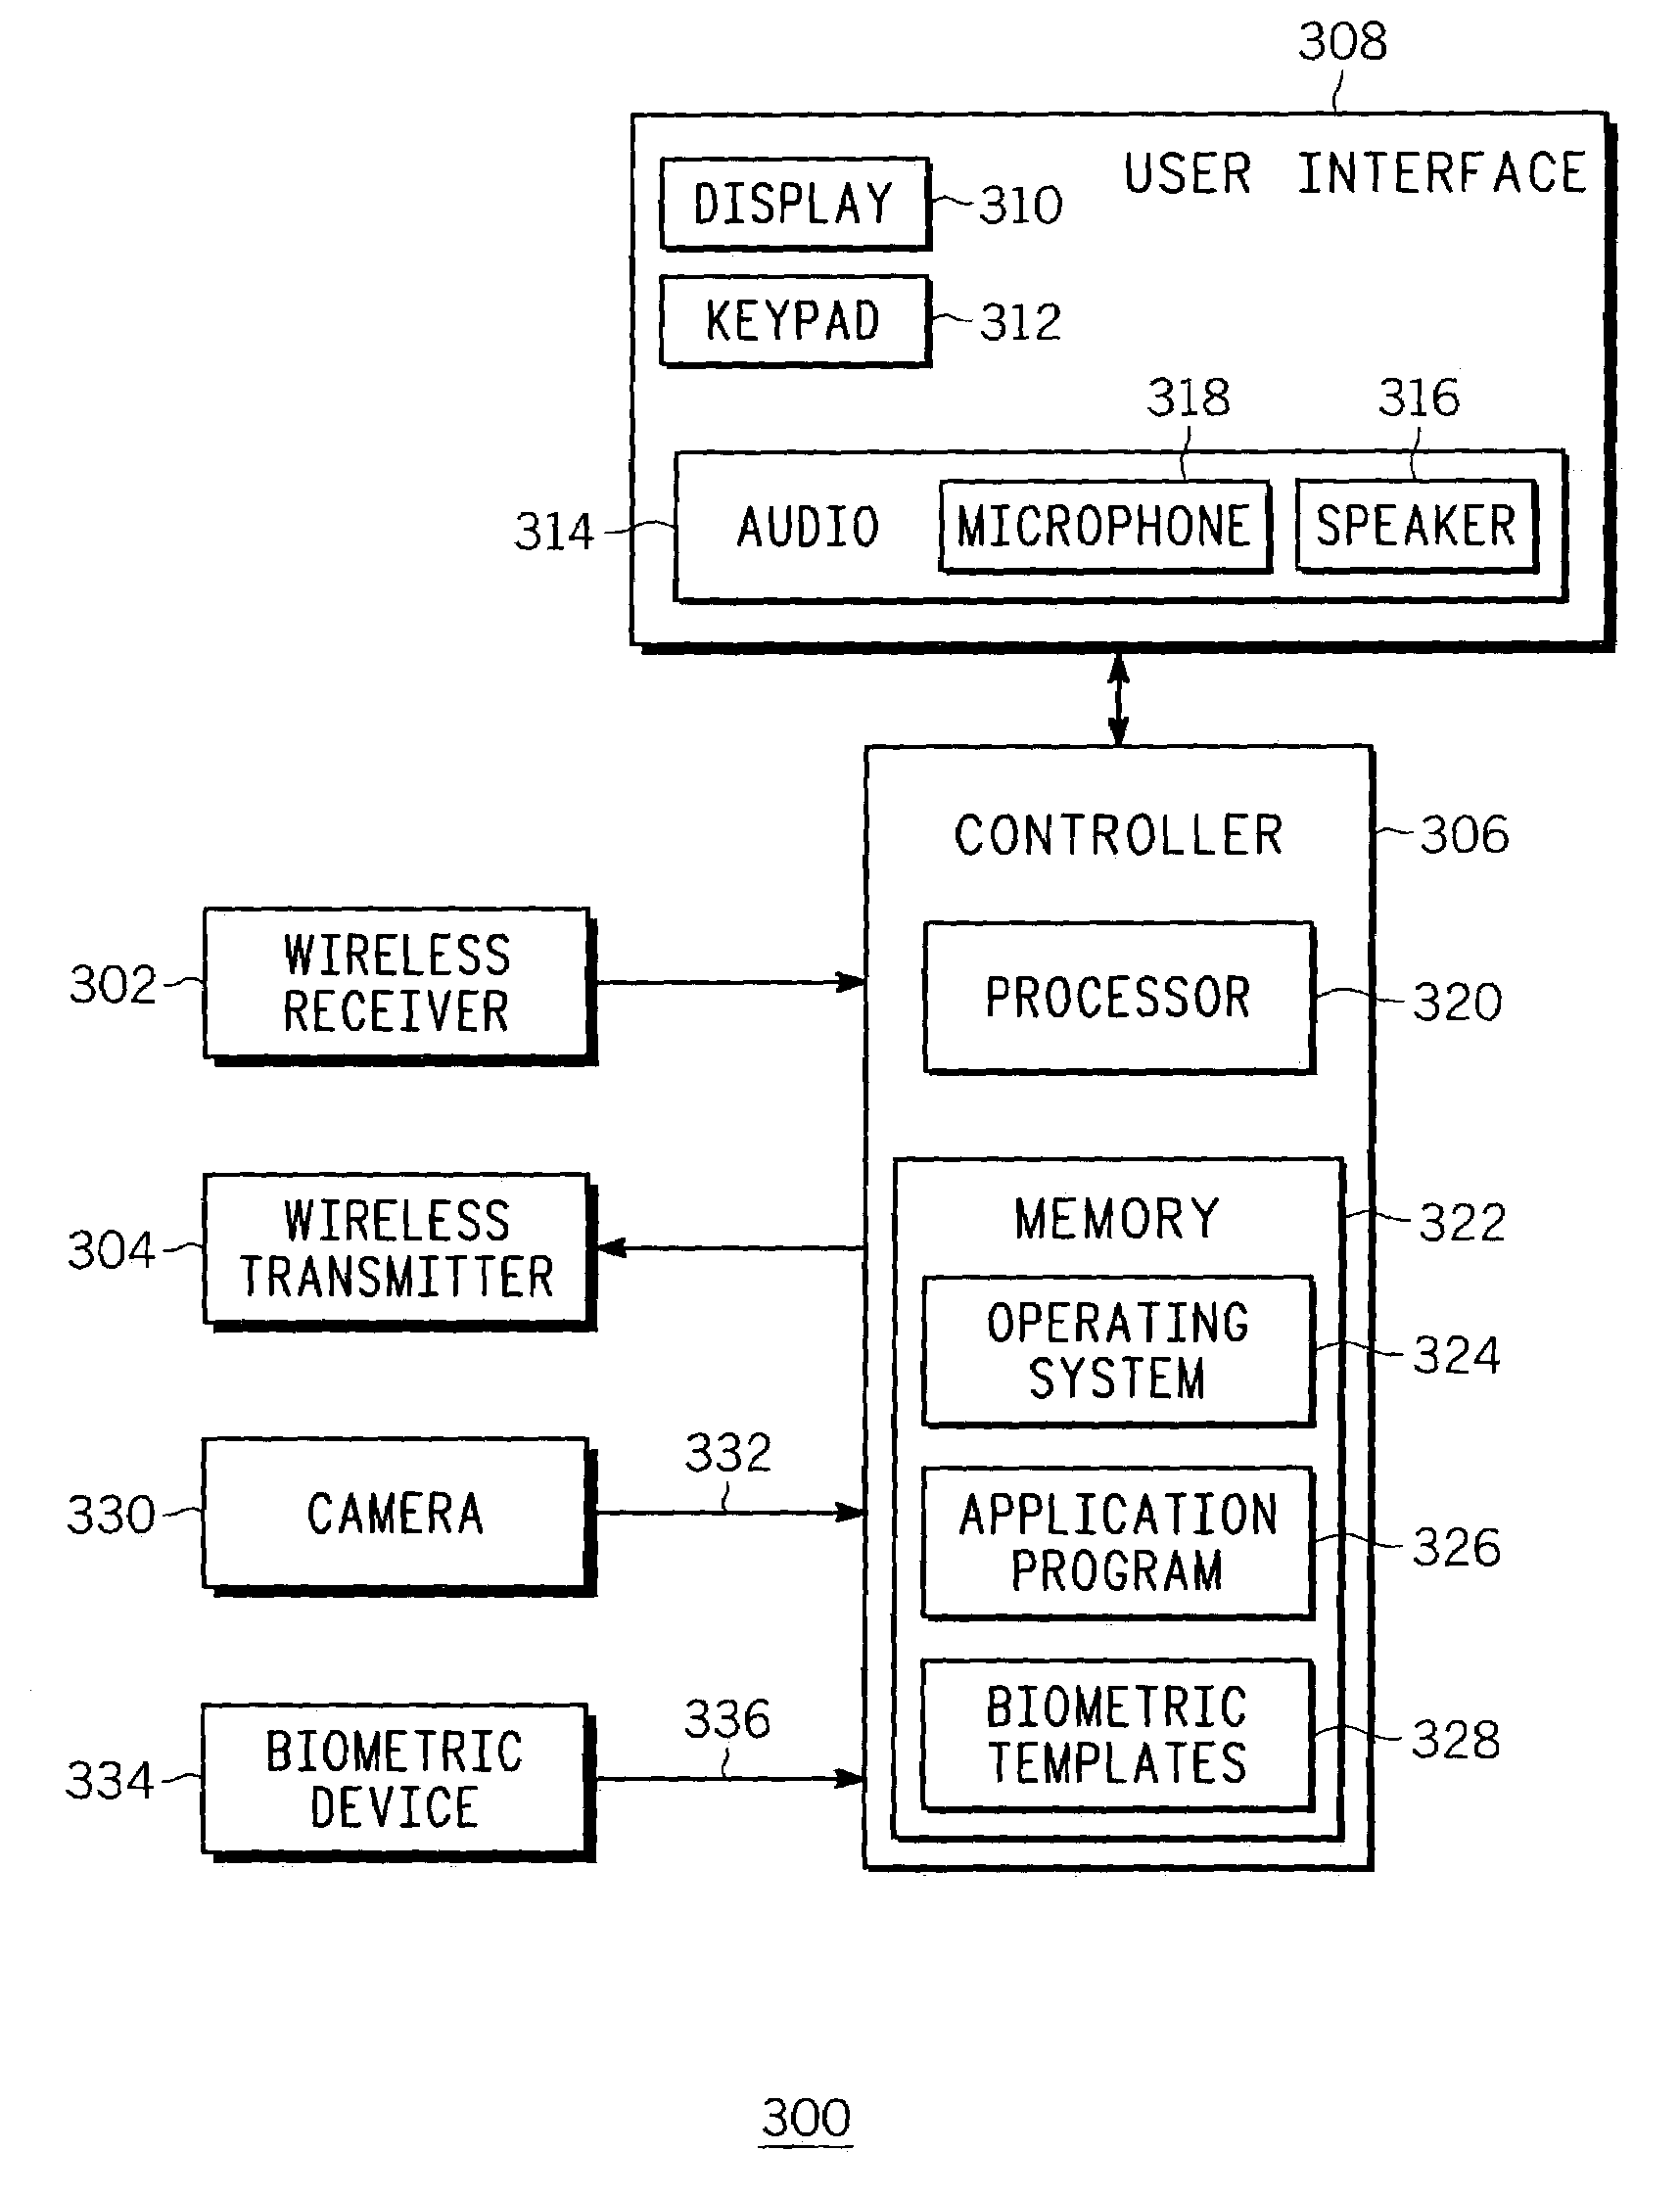 Method and apparatus using biometric sensors for controlling access to a wireless communication device